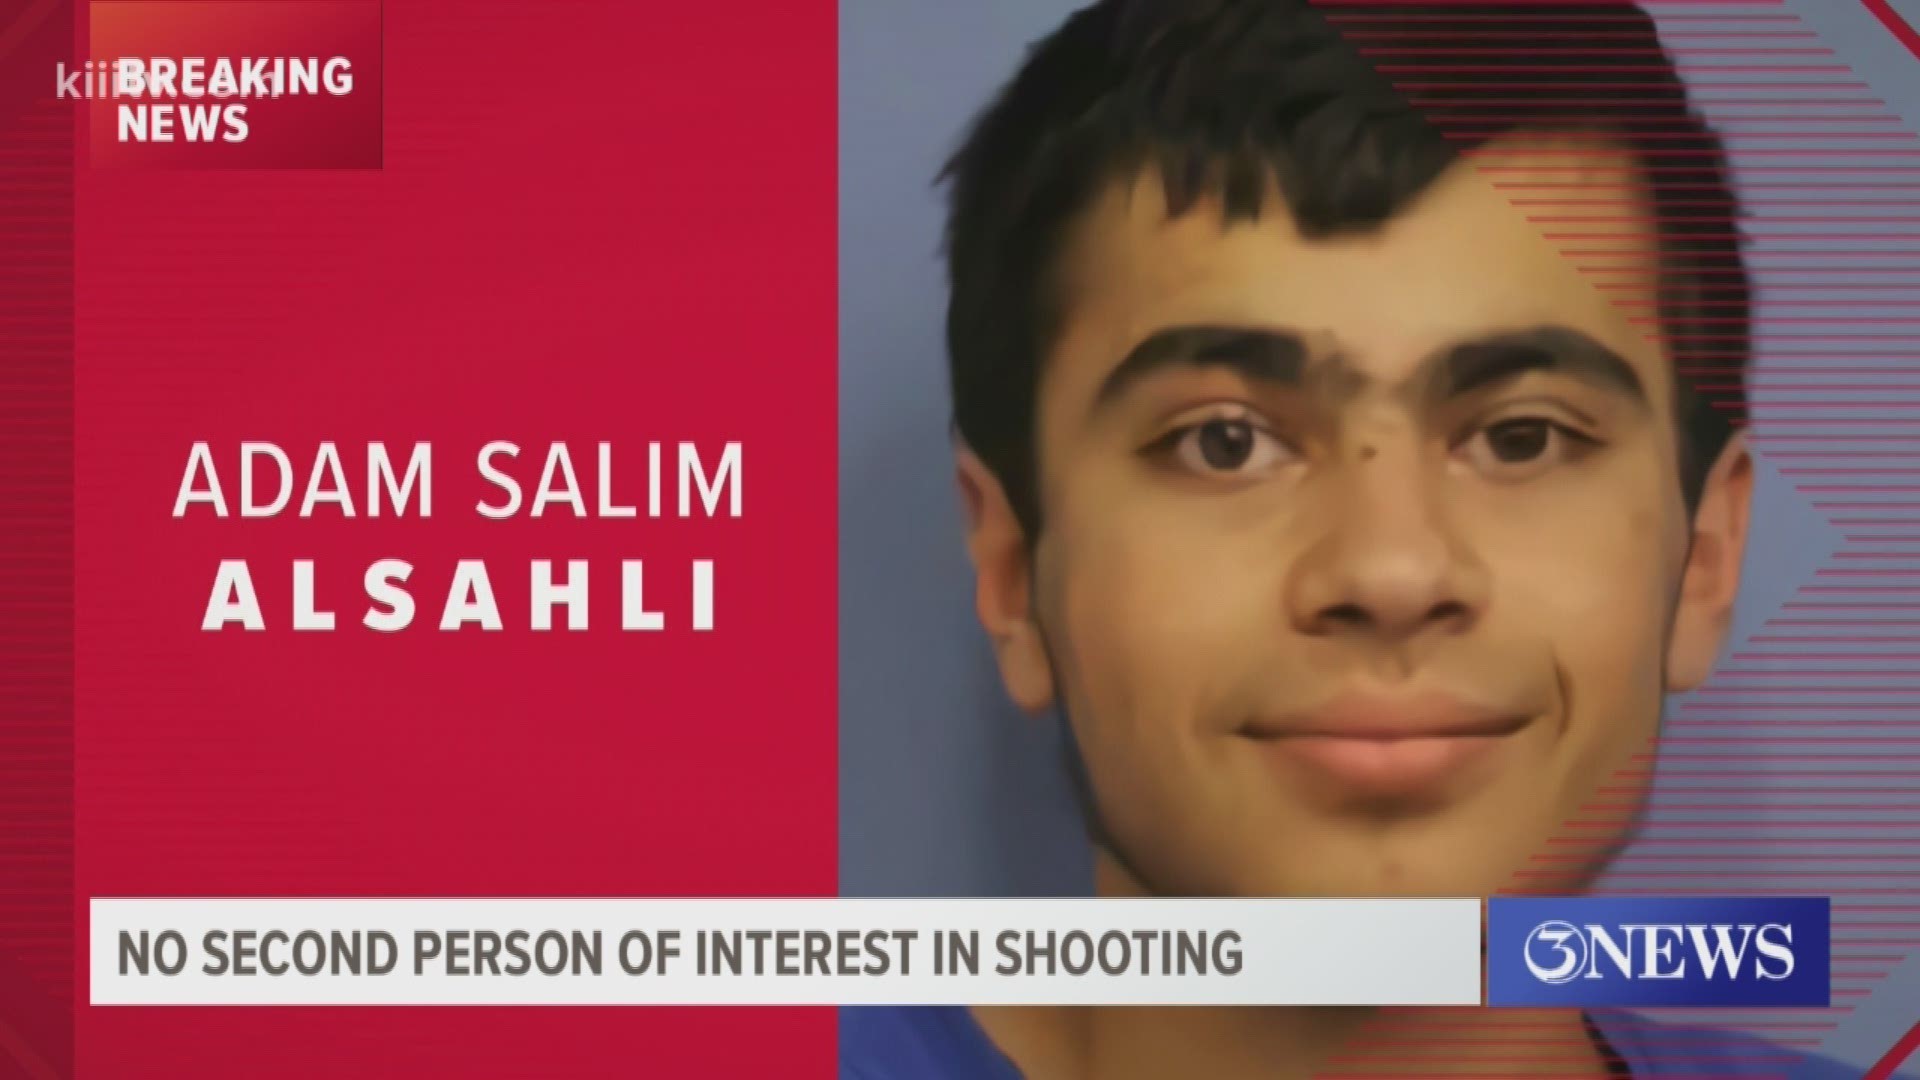 Adam Salim Alsahli expressed support for extremist groups in online posts according to the FBI.